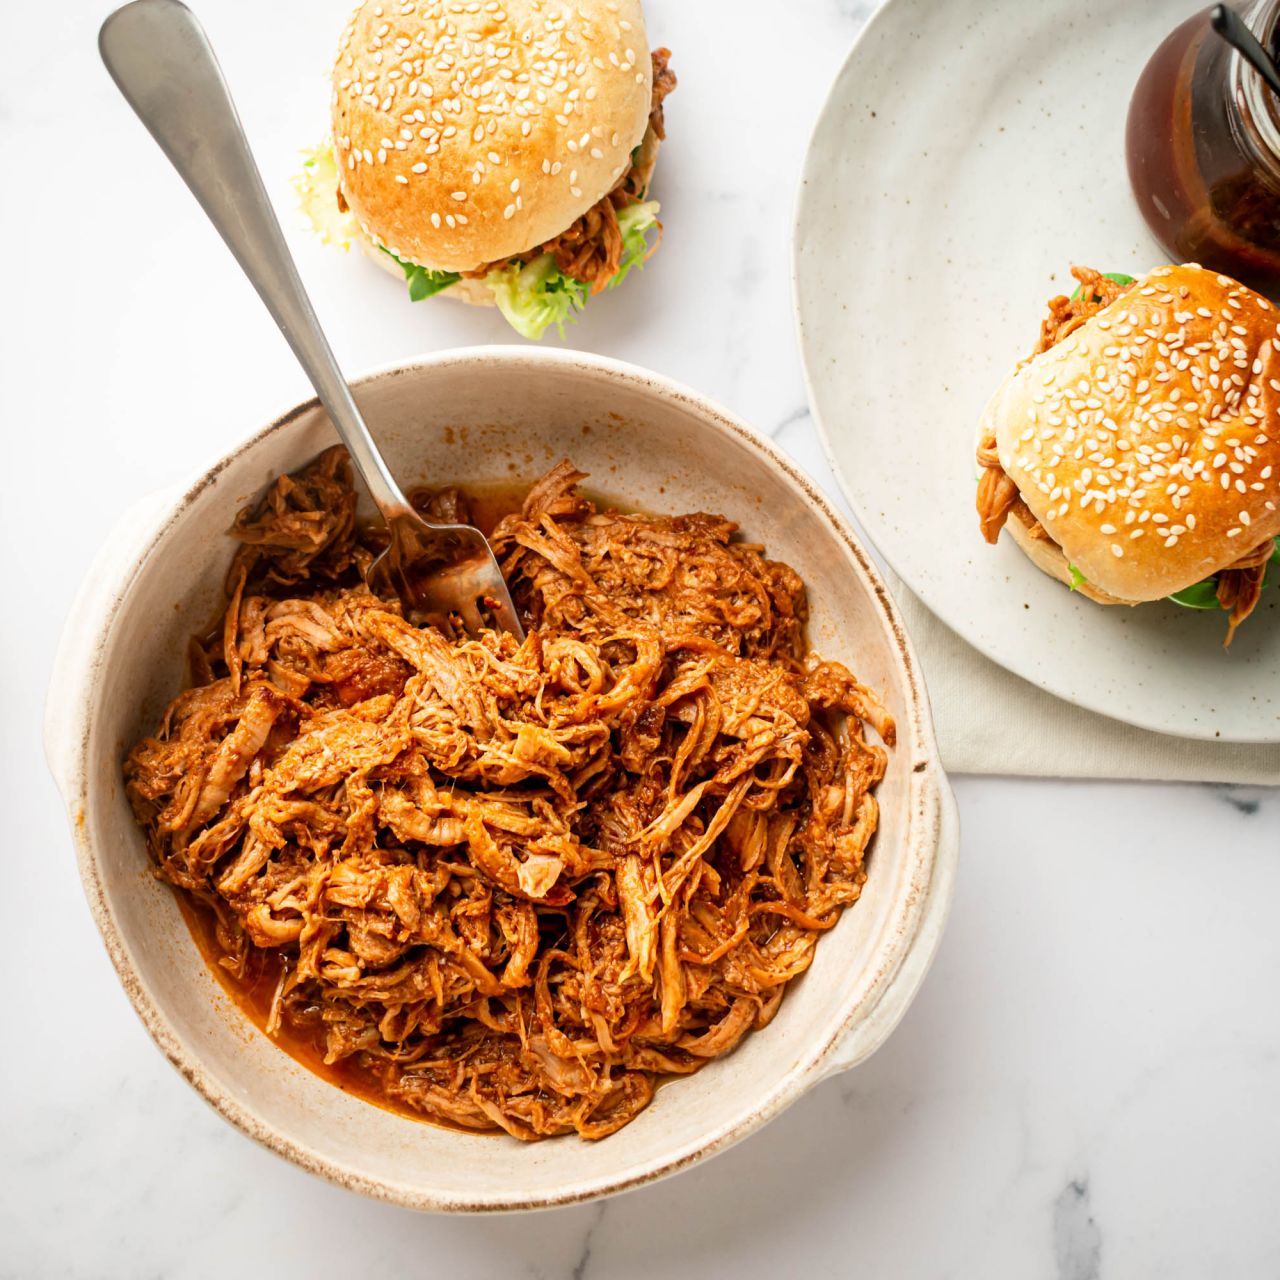 https://www.slenderkitchen.com/sites/default/files/styles/gsd-1x1/public/recipe_images/slow-cooker-spicy-pulled-pork.jpg